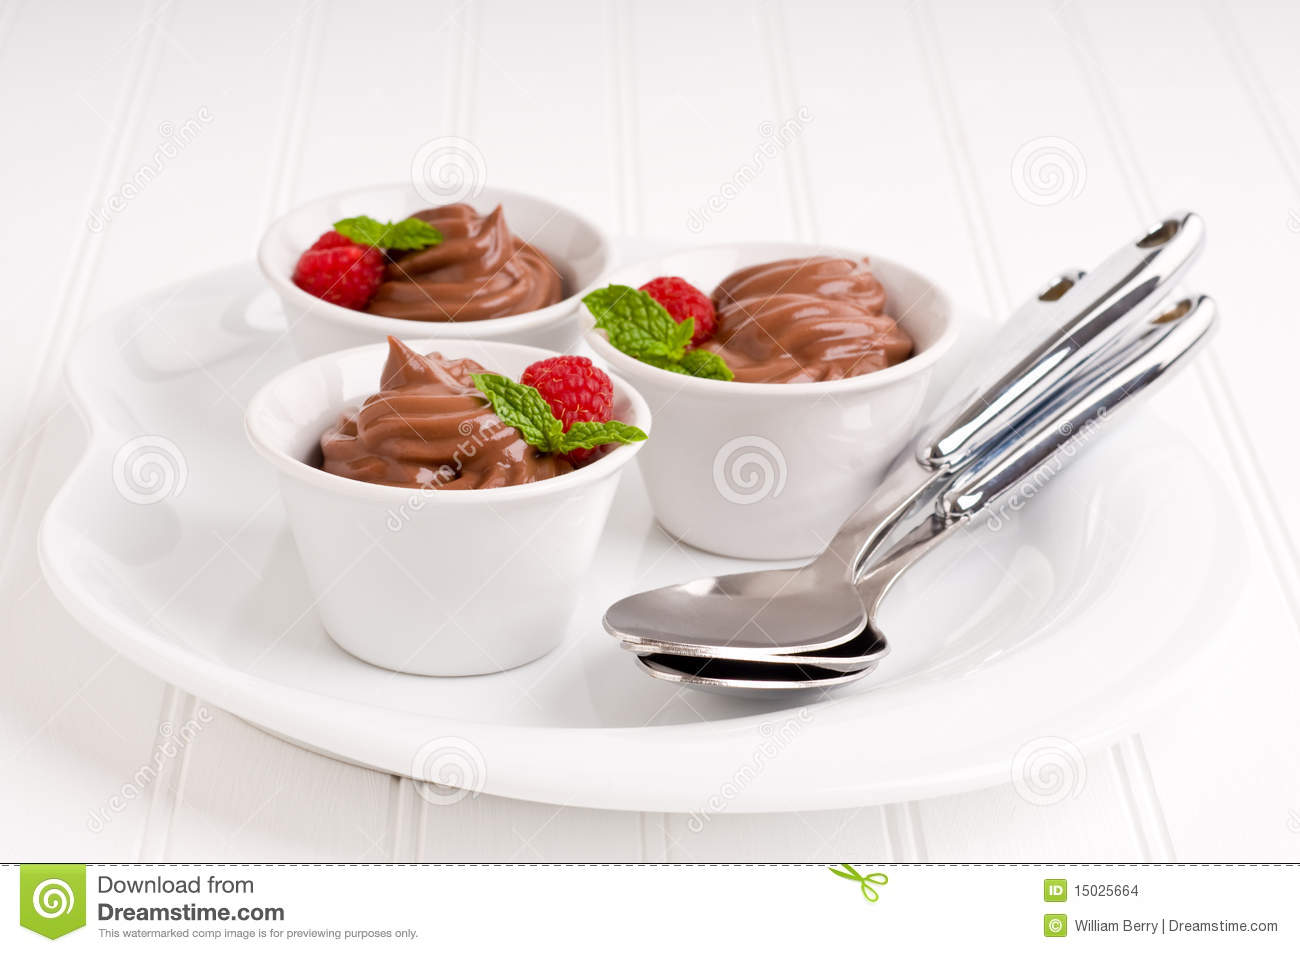 Chocolate Pudding Cups Stock Images   Image  15025664